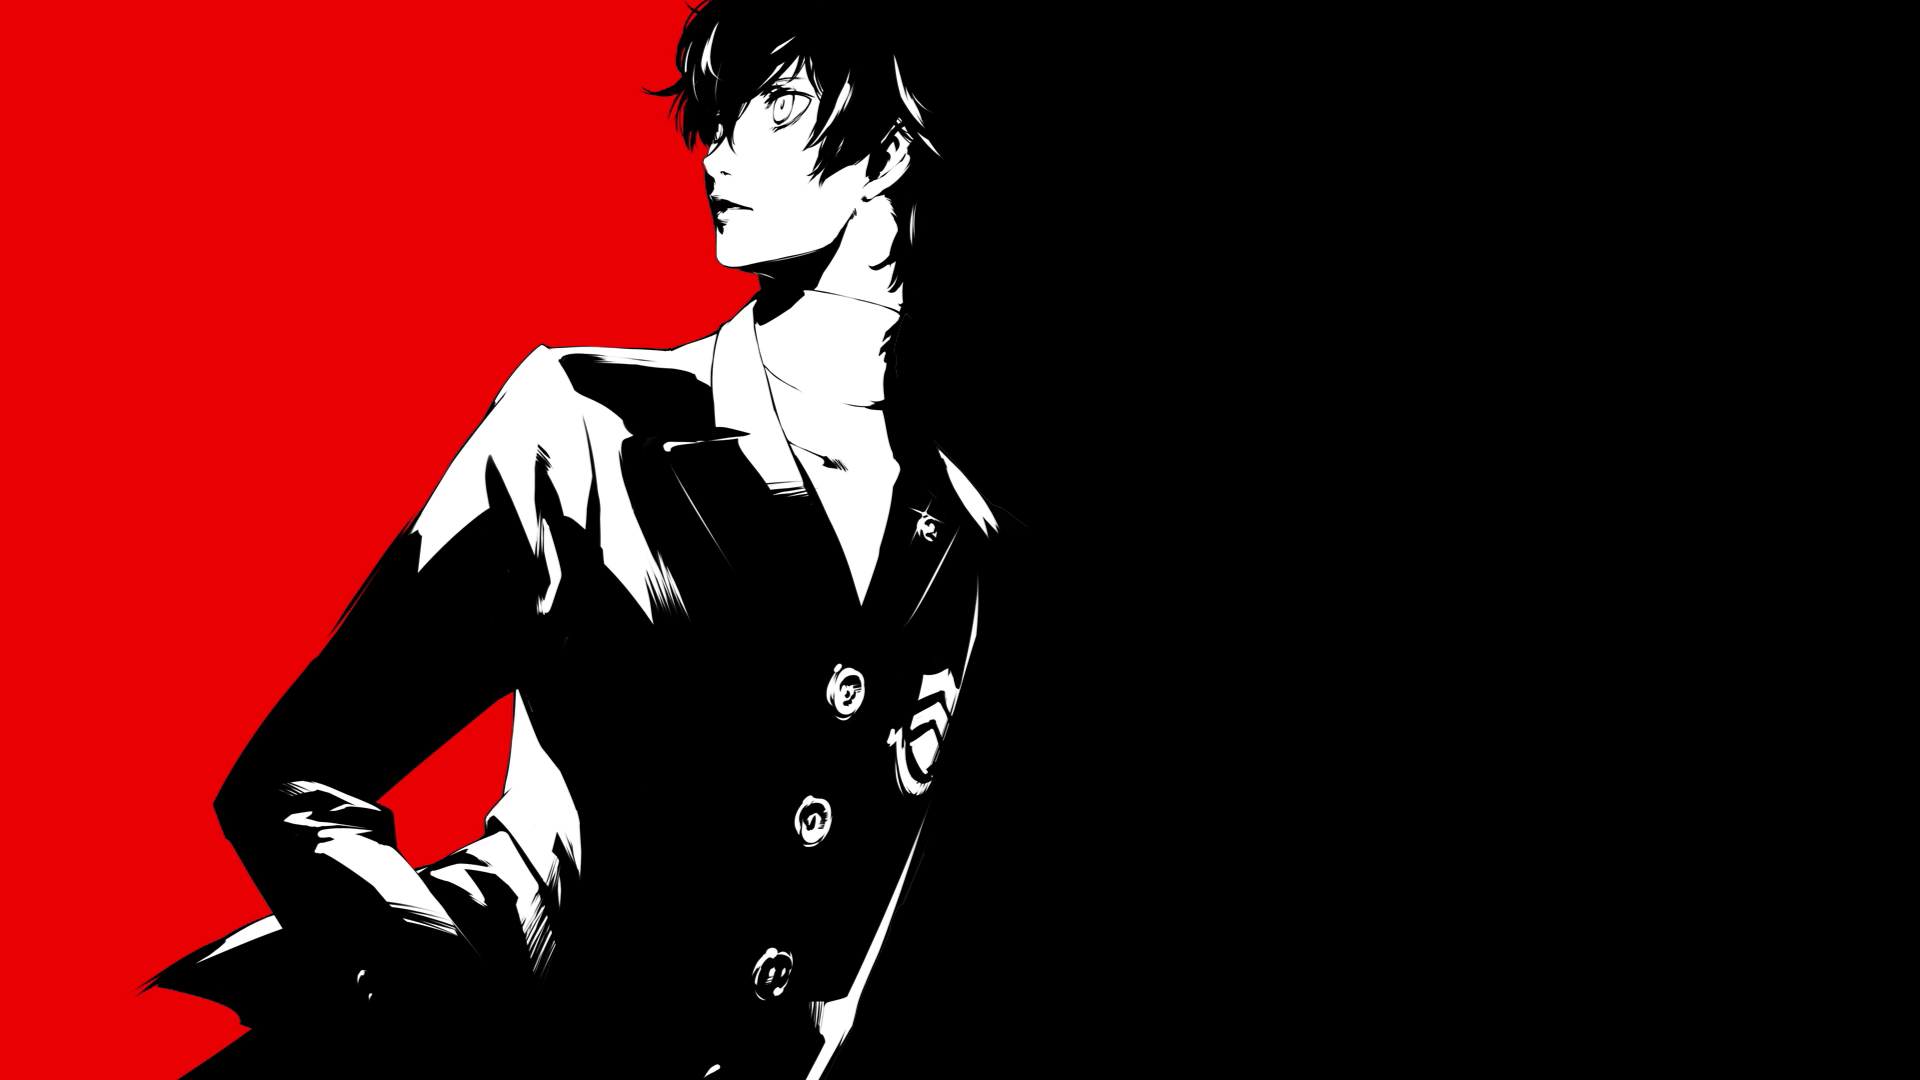 Persona 5 Wallpapers Pictures Images HD Wallpapers Download Free Map Images Wallpaper [wallpaper376.blogspot.com]